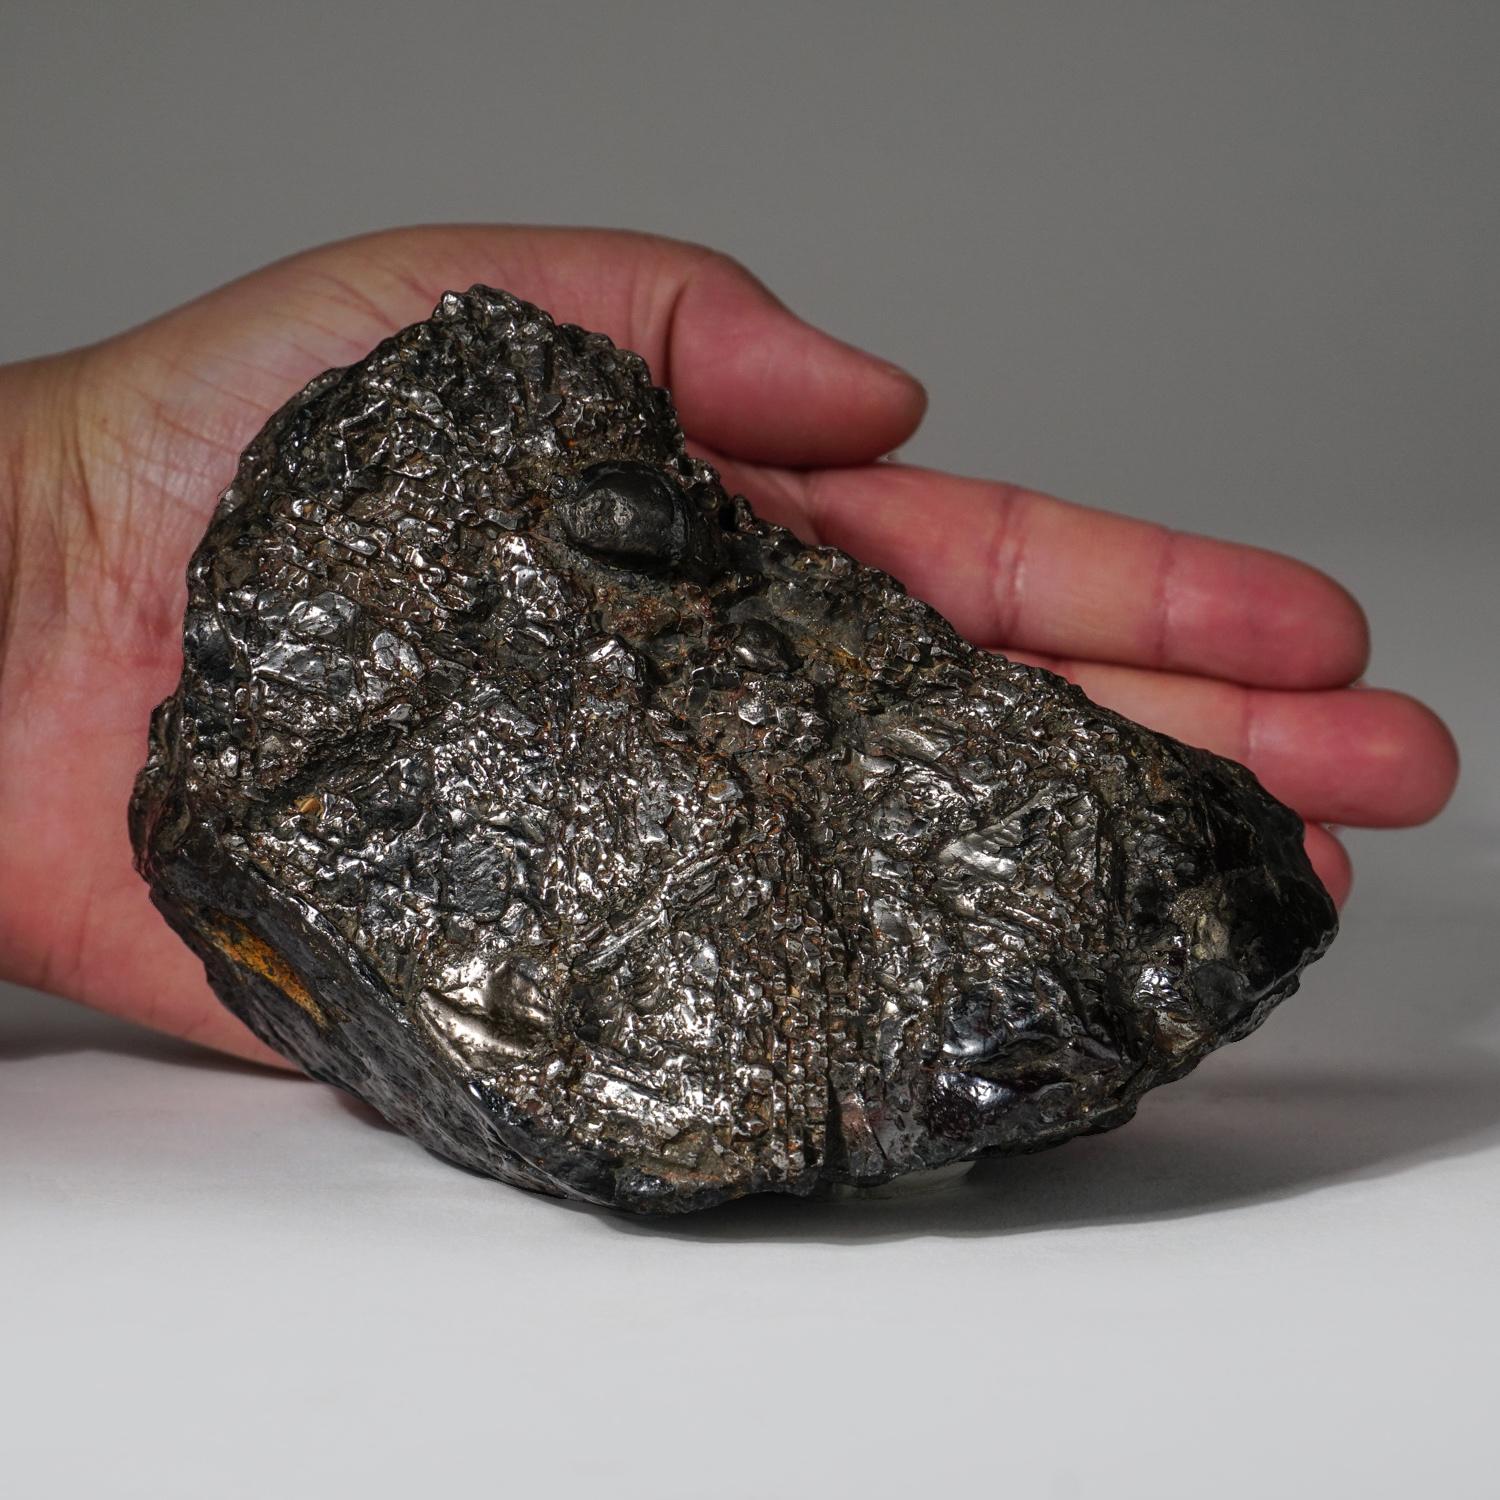 An iron meteorite fell on the Sikhote-Alin Mountains, in southeastern Russia, in 1947. Though large iron meteorite falls had been witnessed previously and fragments recovered, never before in recorded history had a fall of this magnitude been